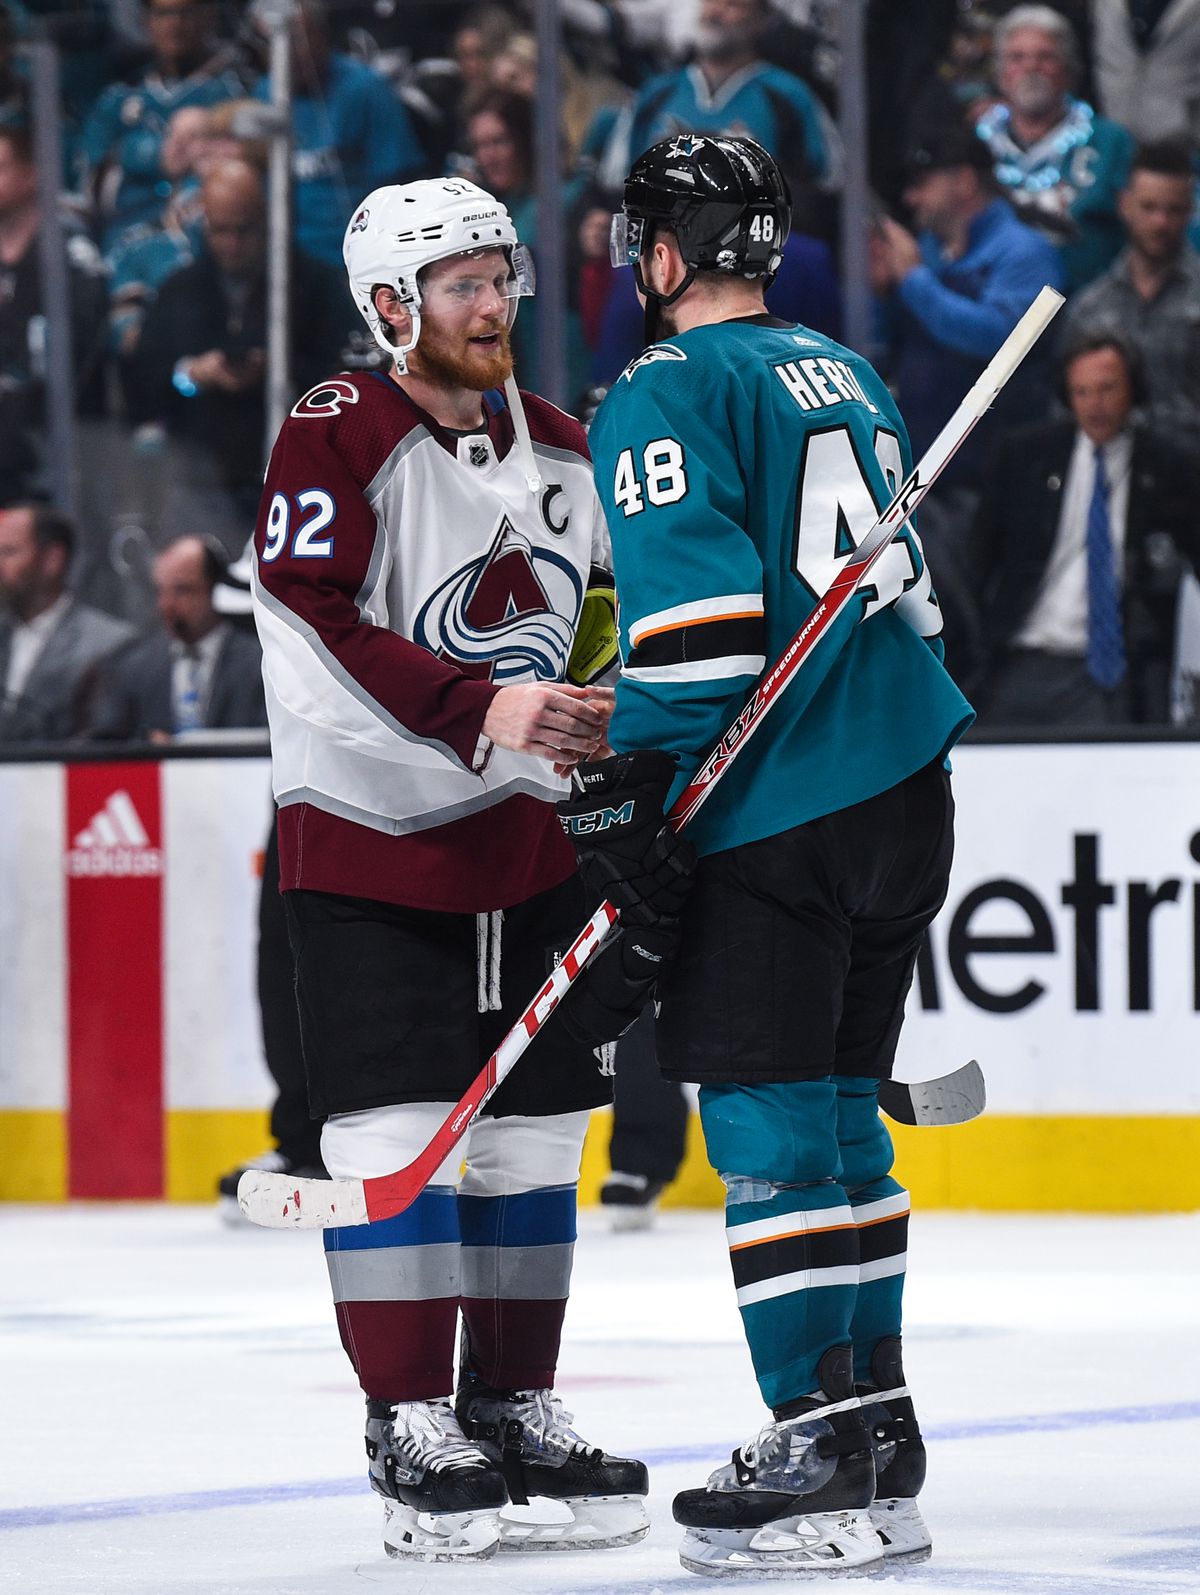 SAN JOSE, CA - MAY 08: Colorado Avalanche forward Gabriel Landeskog (92) shakes hands with San Jose Sharks forward Tomas Hertl (48) after game seven of the second round of the Stanley Cup Playoffs between the Colorado Avalanche and the San Jose Sharks 